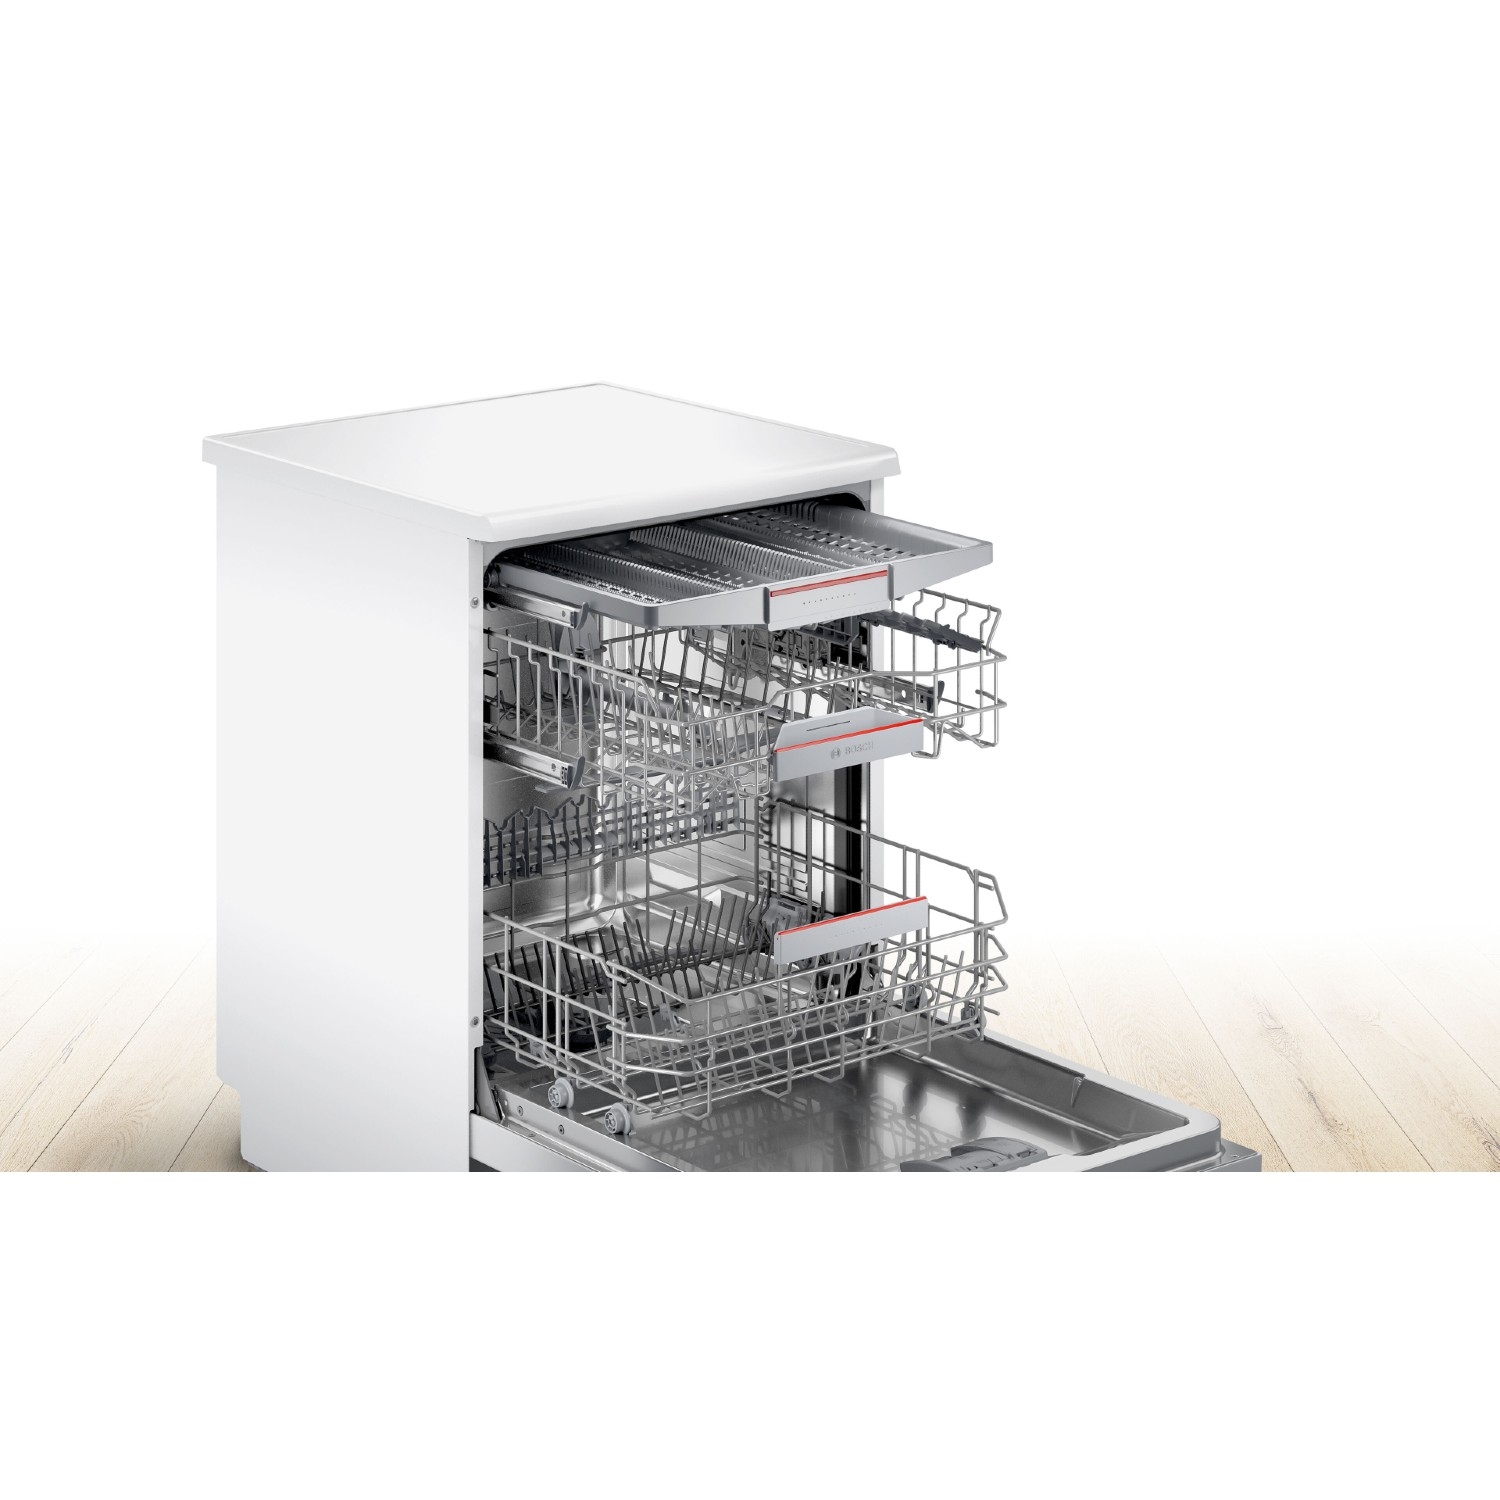 Bosch SMS4HCW40G Full Size Dishwasher - White - 14 Place Settings - 1